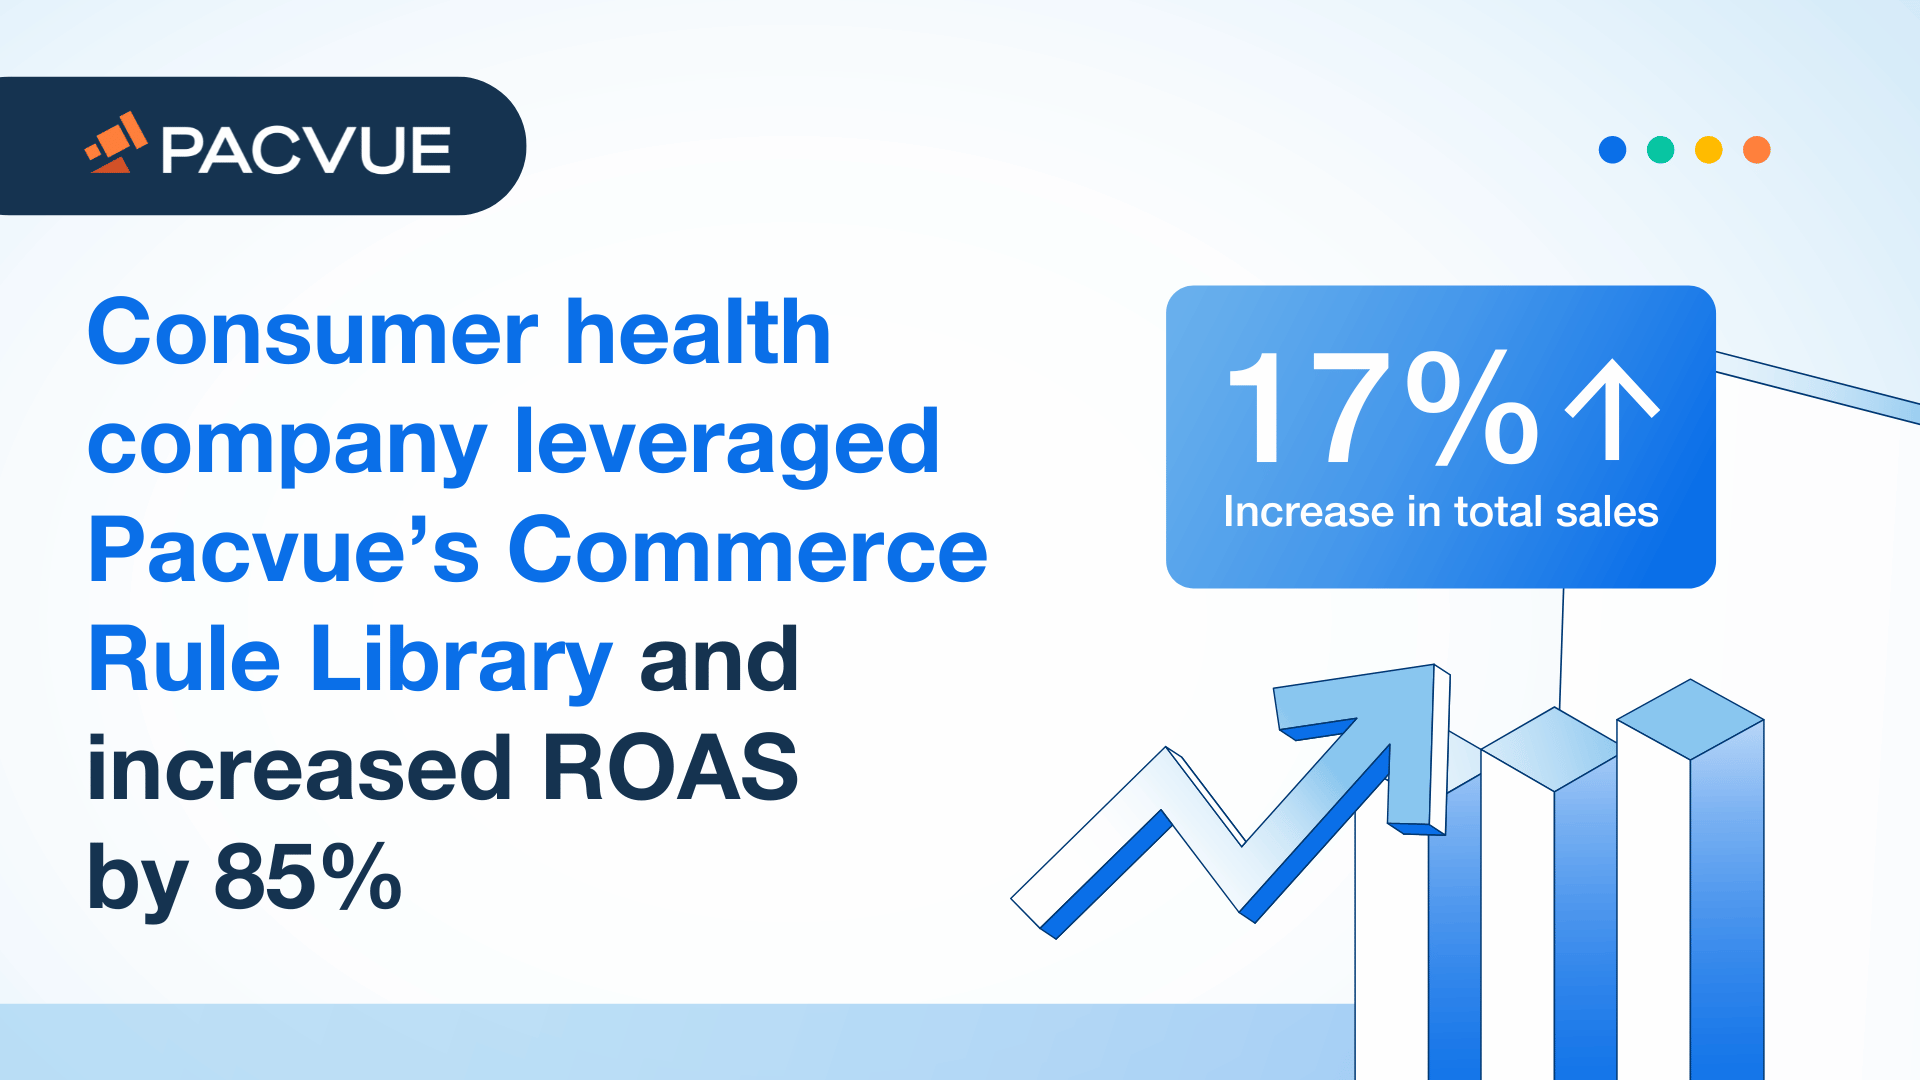 Consumer health company leveraged Pacvue's Commerce Rule Library and increased ROAS by 85%